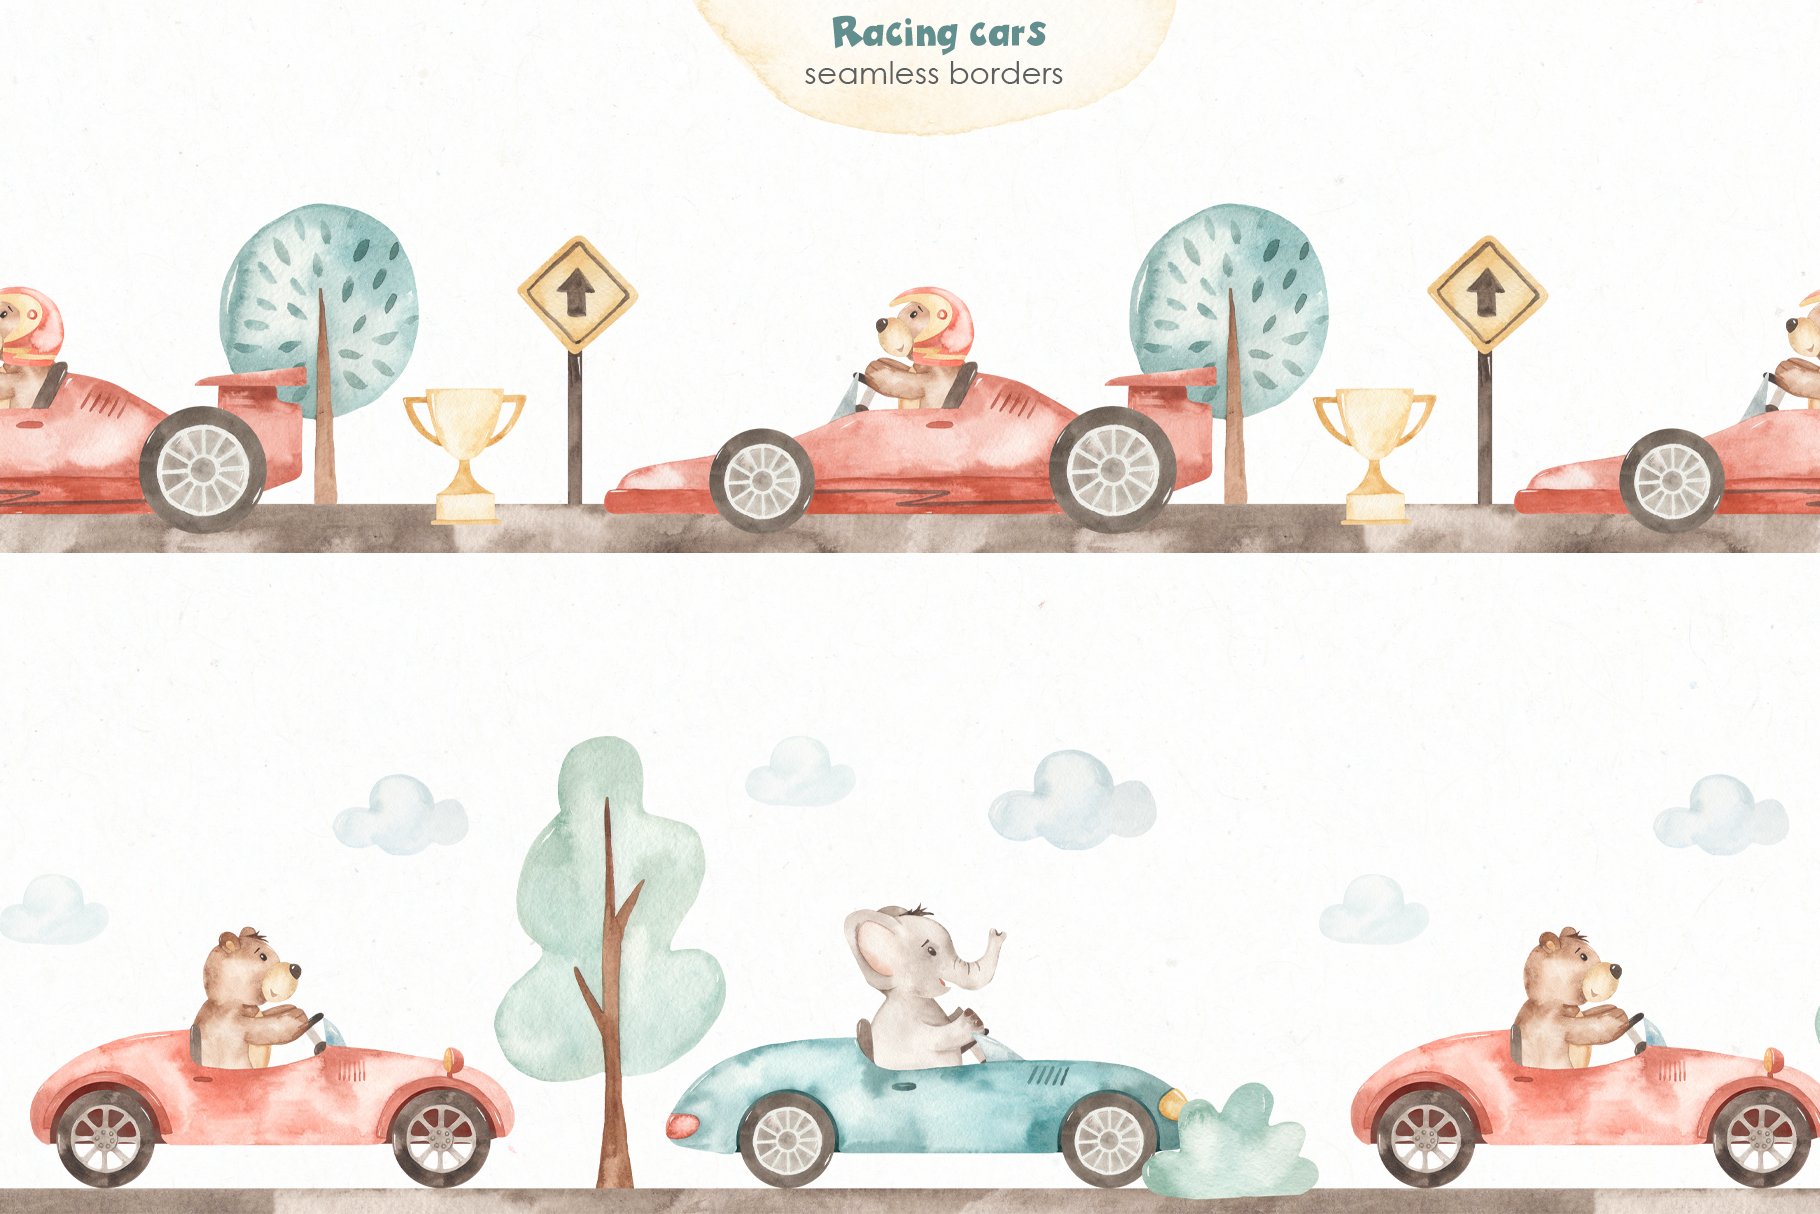 Two ooptions of racing cars illustrations.